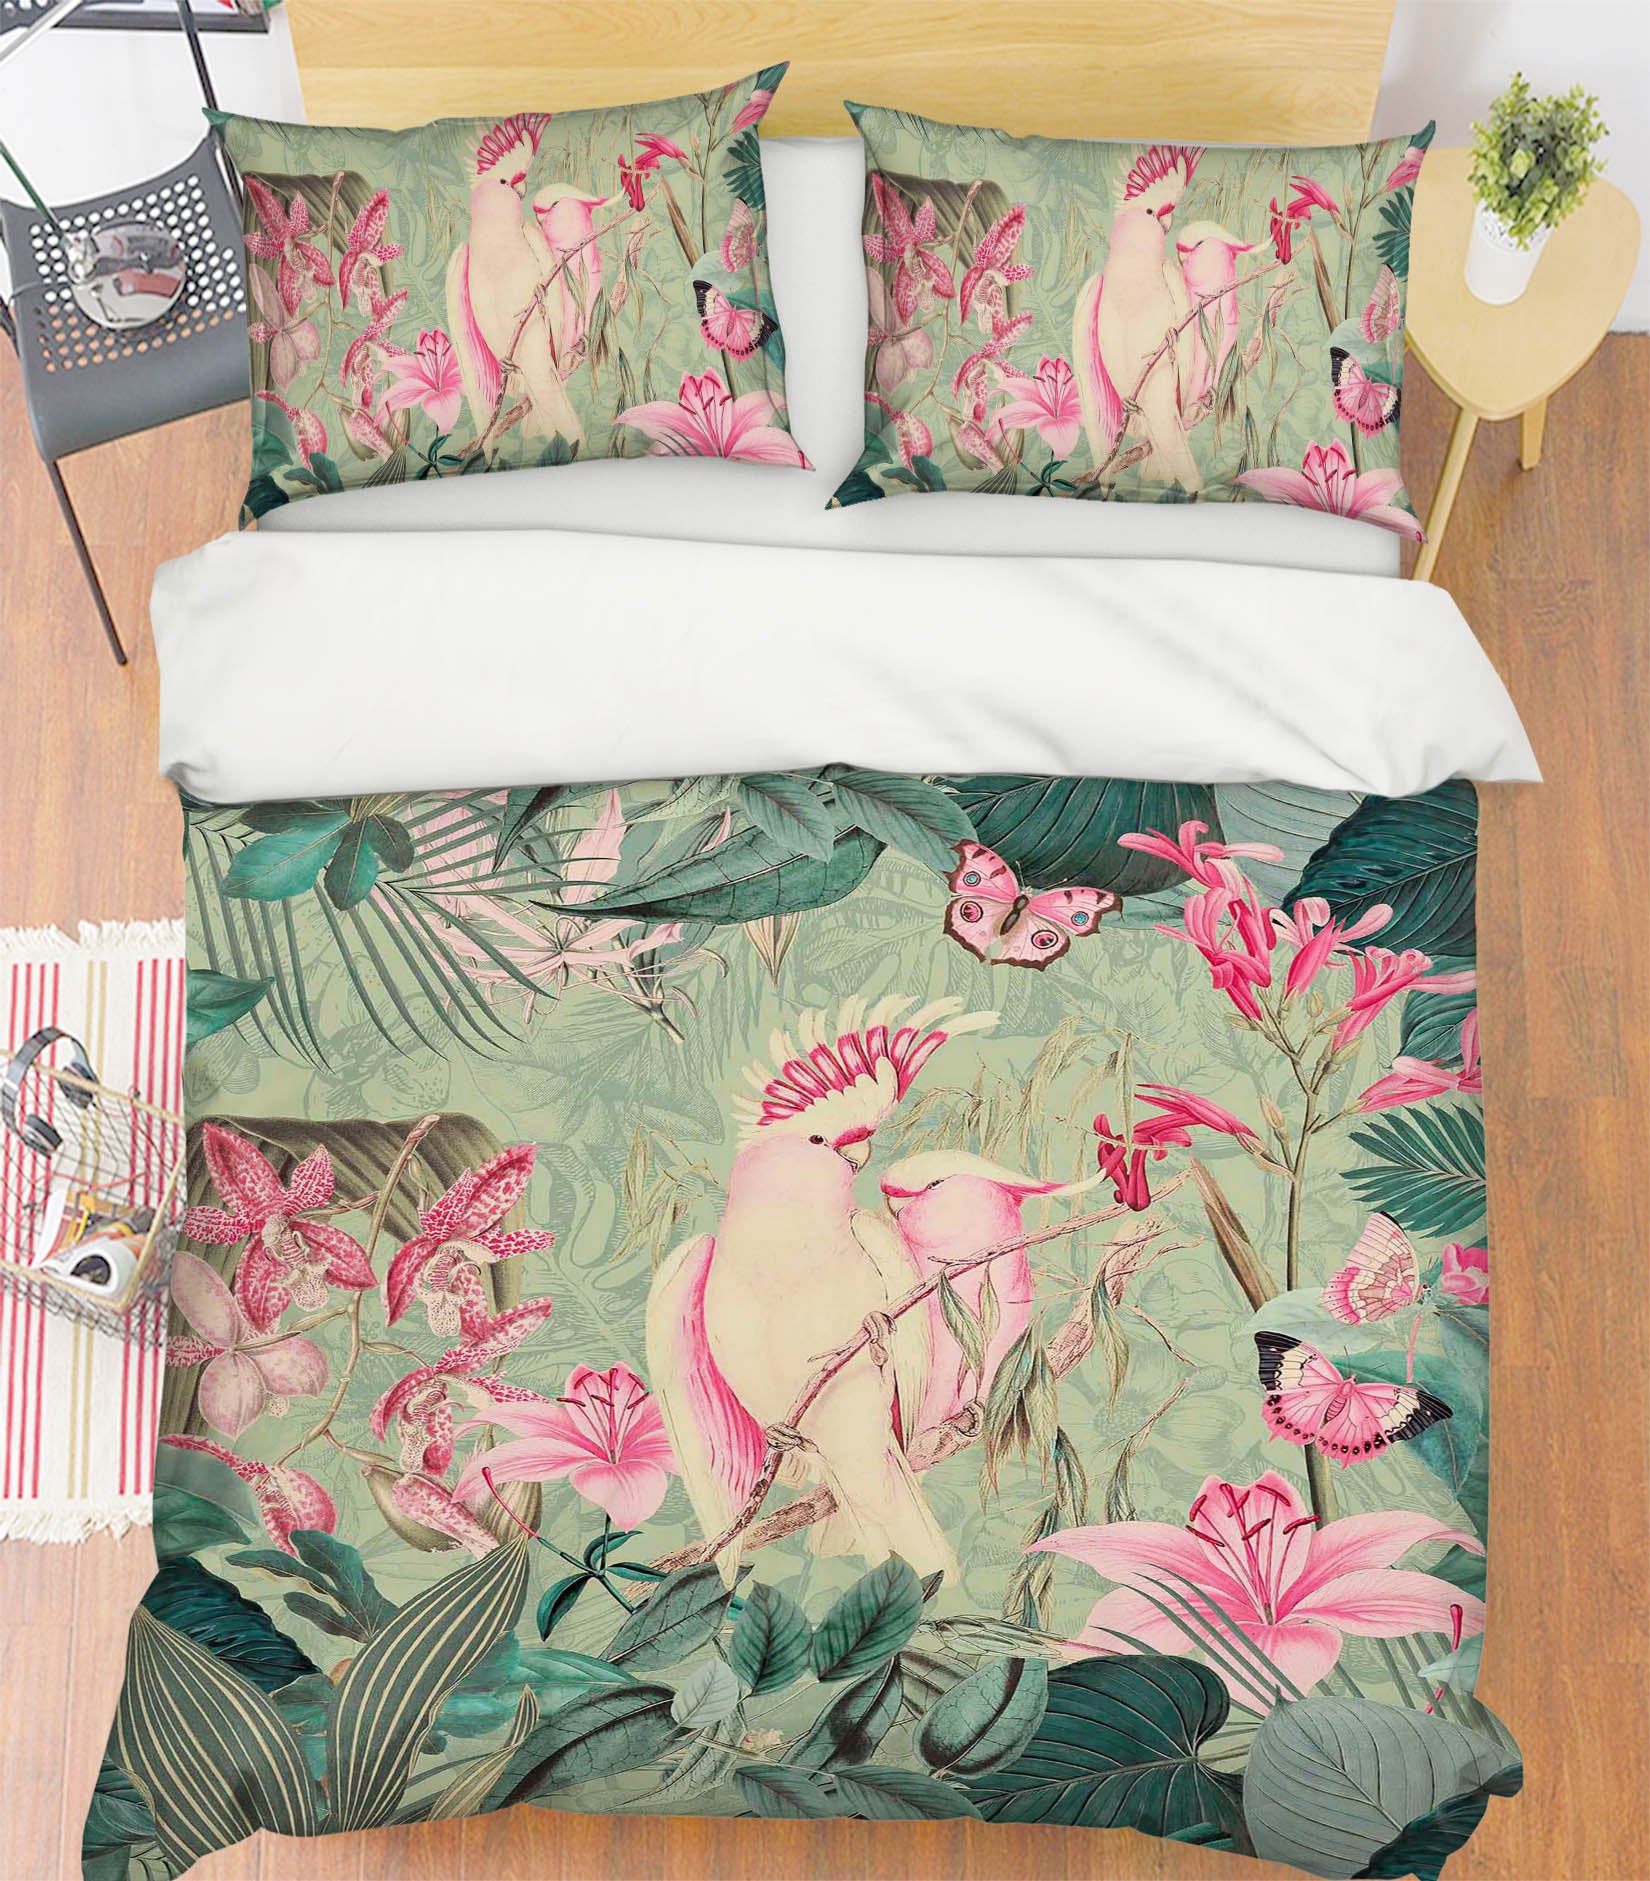 3D Cockatoos And Butterflies 2110 Andrea haase Bedding Bed Pillowcases Quilt